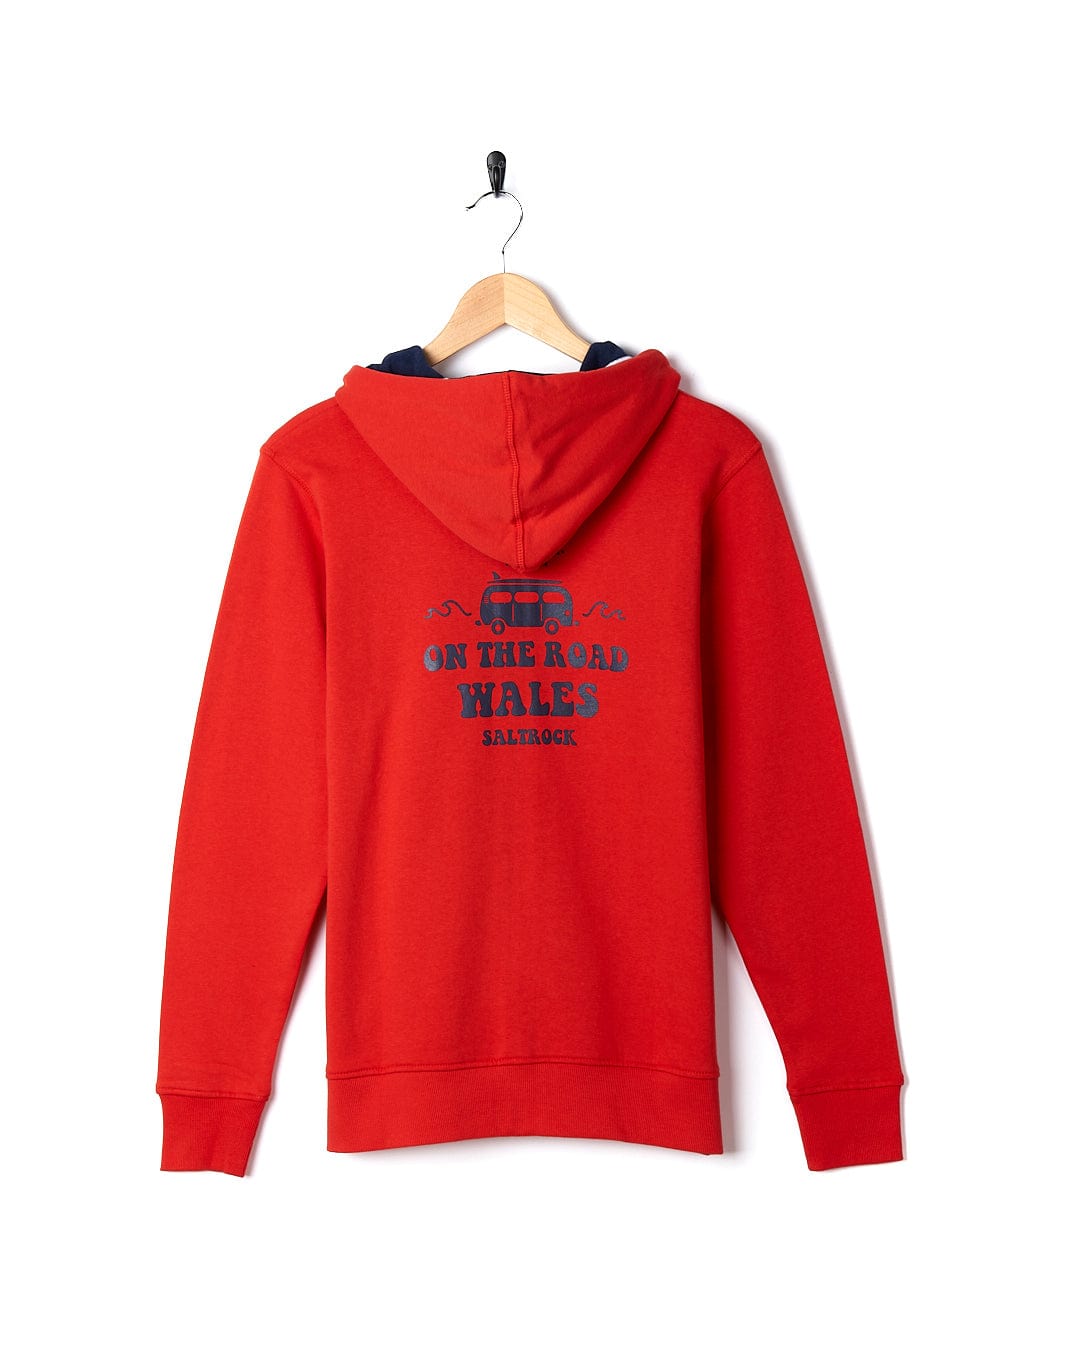 A Saltrock On The Road Wales - Women's Zip Hoodie - Red with a blue and red logo on it.